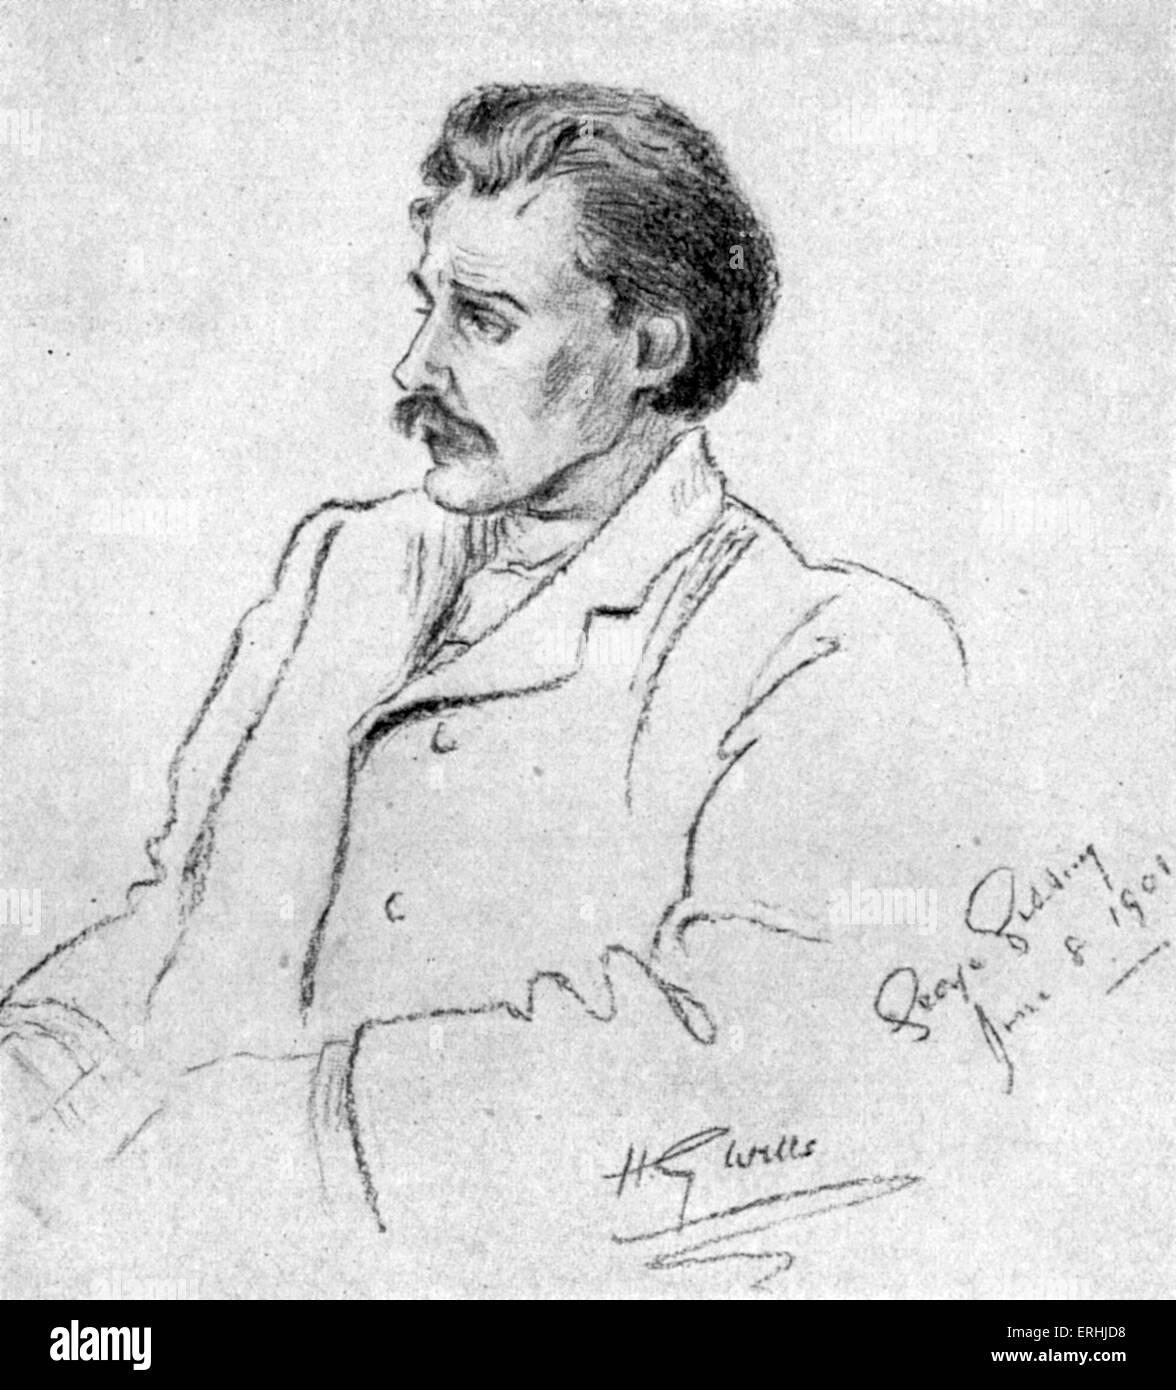 George Gissing - portrait of the English novelist. Drawing by his friend, the English writer, H. G. Wells. 22 November 1857 – 28 December 1903. Stock Photo